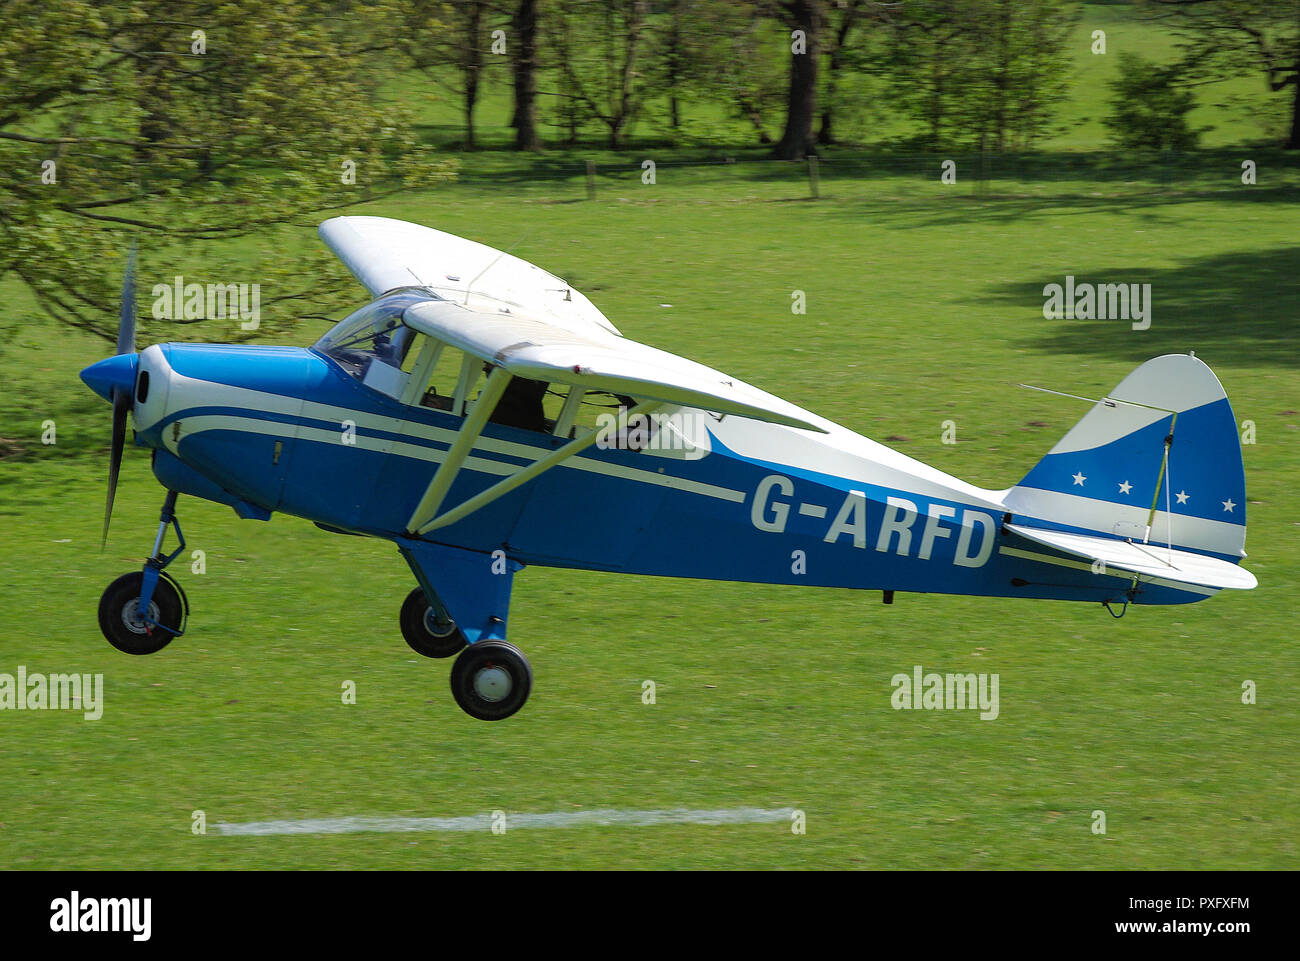 Piper PA-22 Tri pacer plane taking off from Henham Park Suffolk countryside grass airstrip. G-ARFD. Tripacer high wing monoplane light aircraft Stock Photo